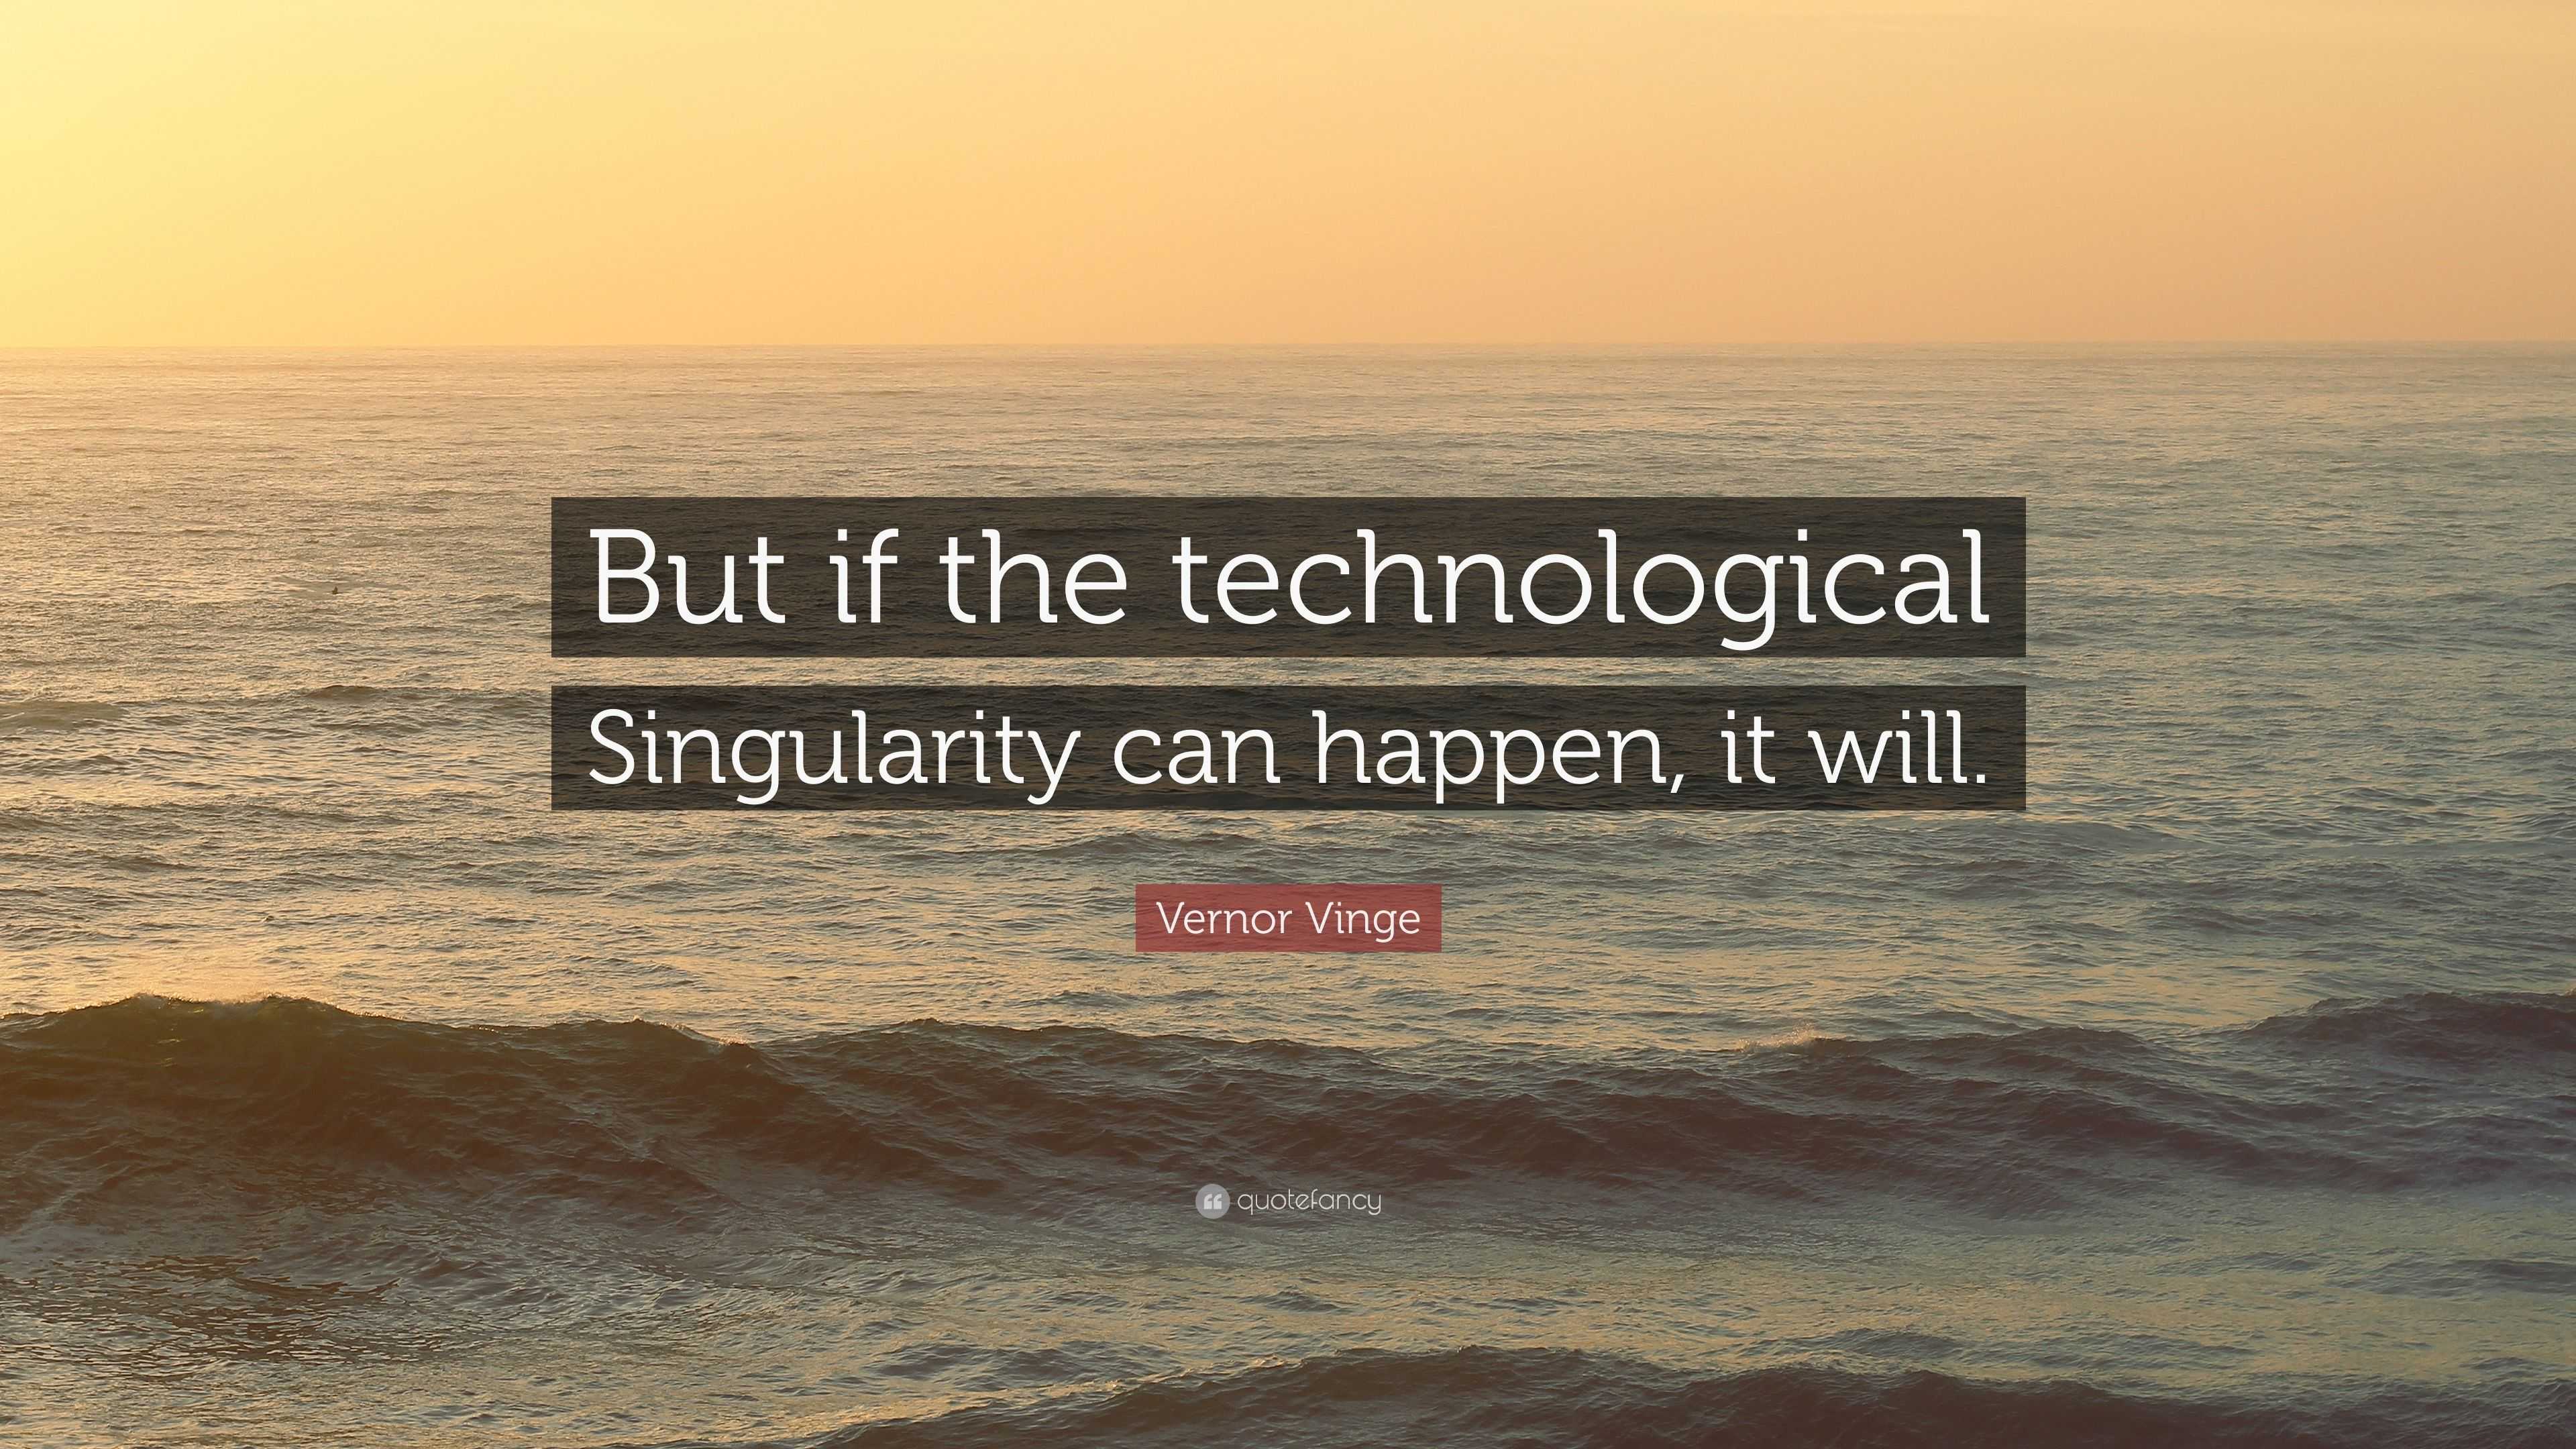 https://quotefancy.com/media/wallpaper/3840x2160/3133091-Vernor-Vinge-Quote-But-if-the-technological-Singularity-can-happen.jpg